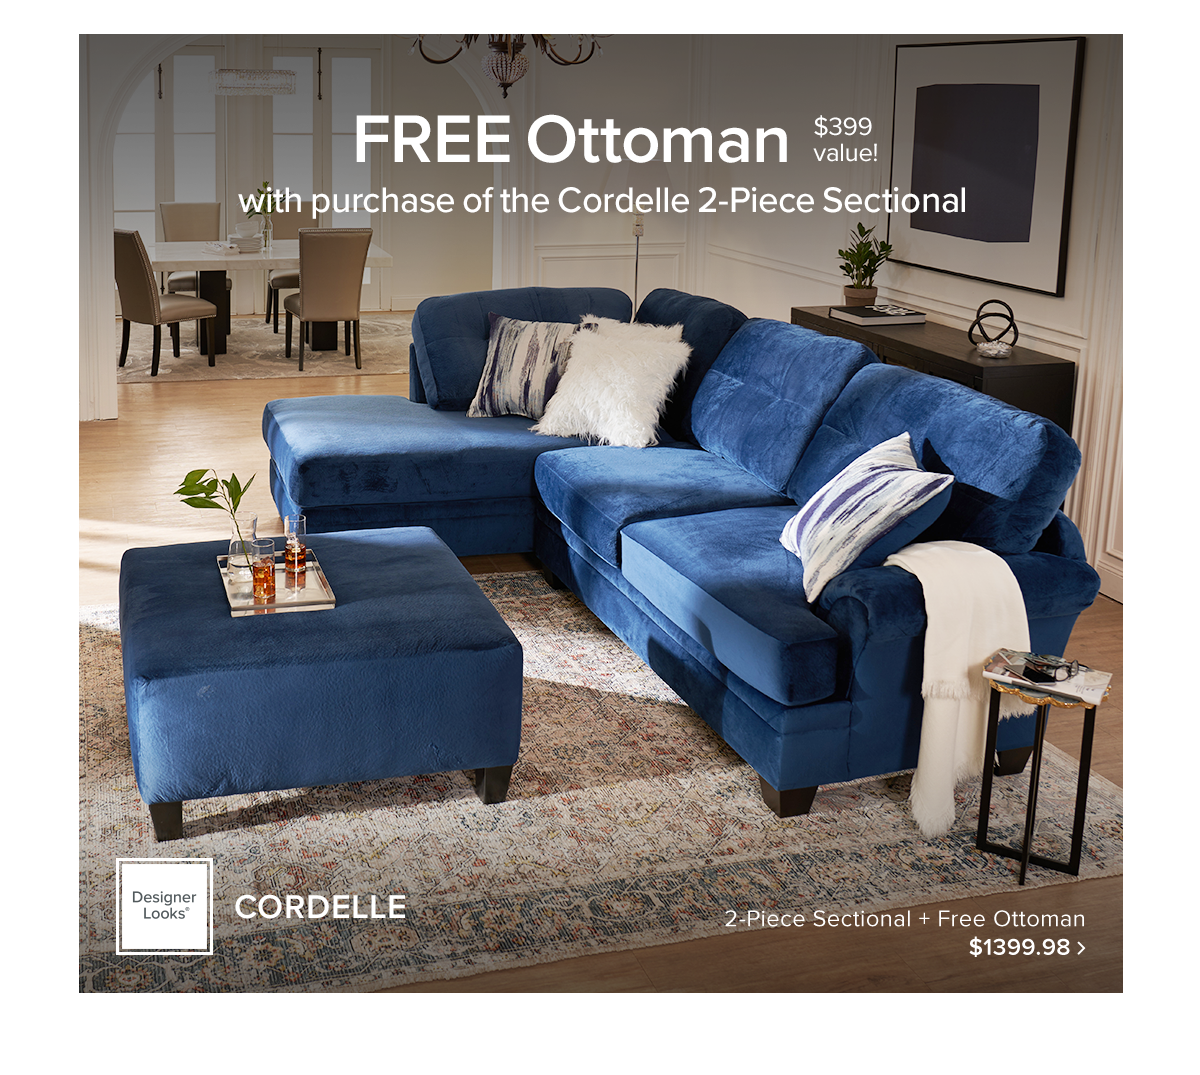 FREE Ottoman with purchase of the Cordelle 2-Piece Sectional